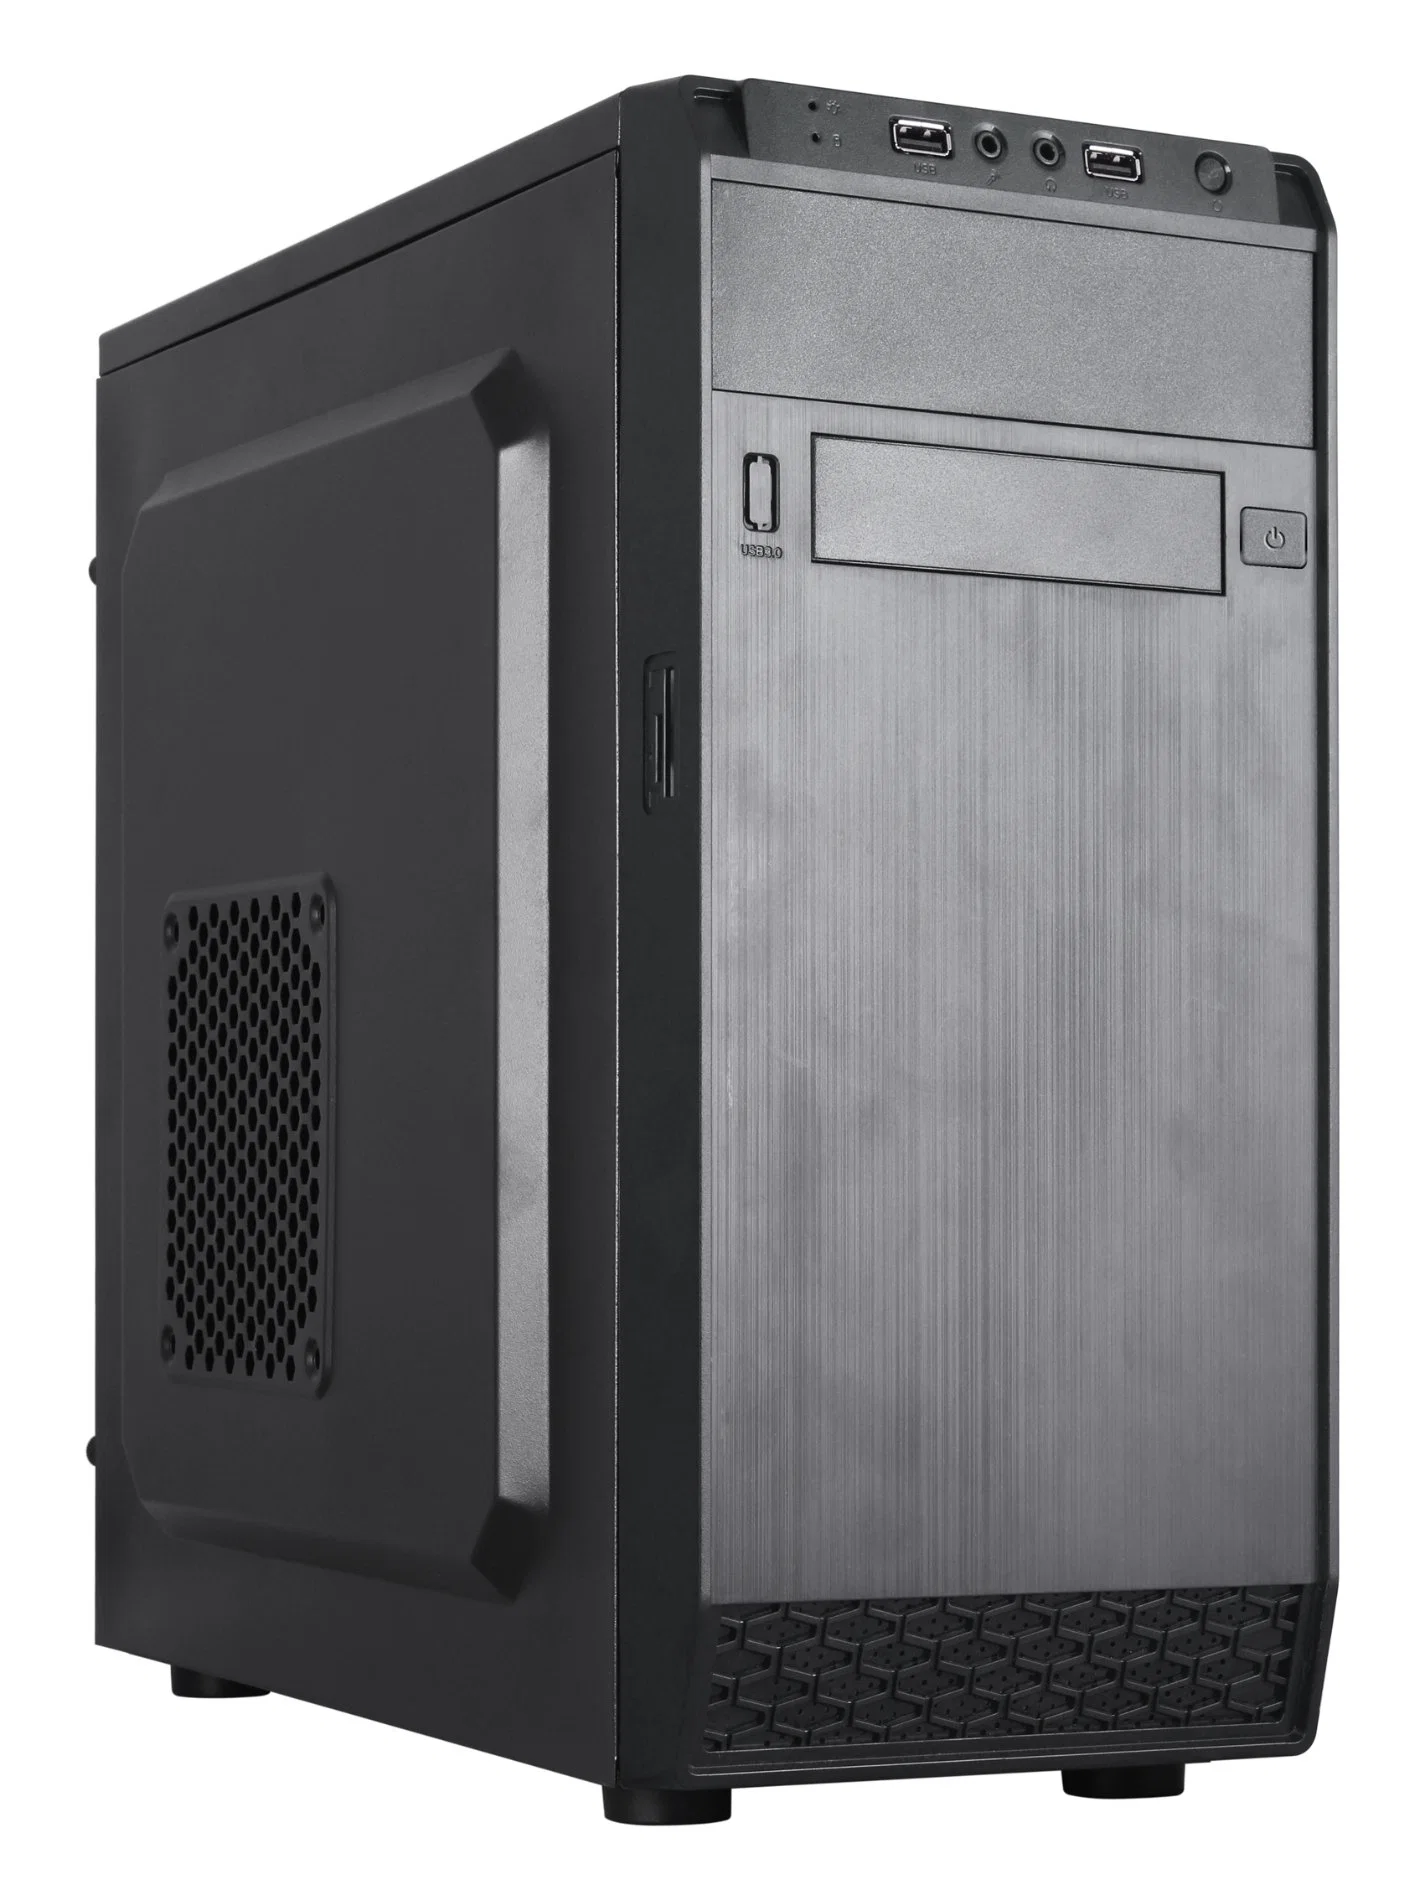 PC Case Chassis Cabinet for Micro ATX Motherboard